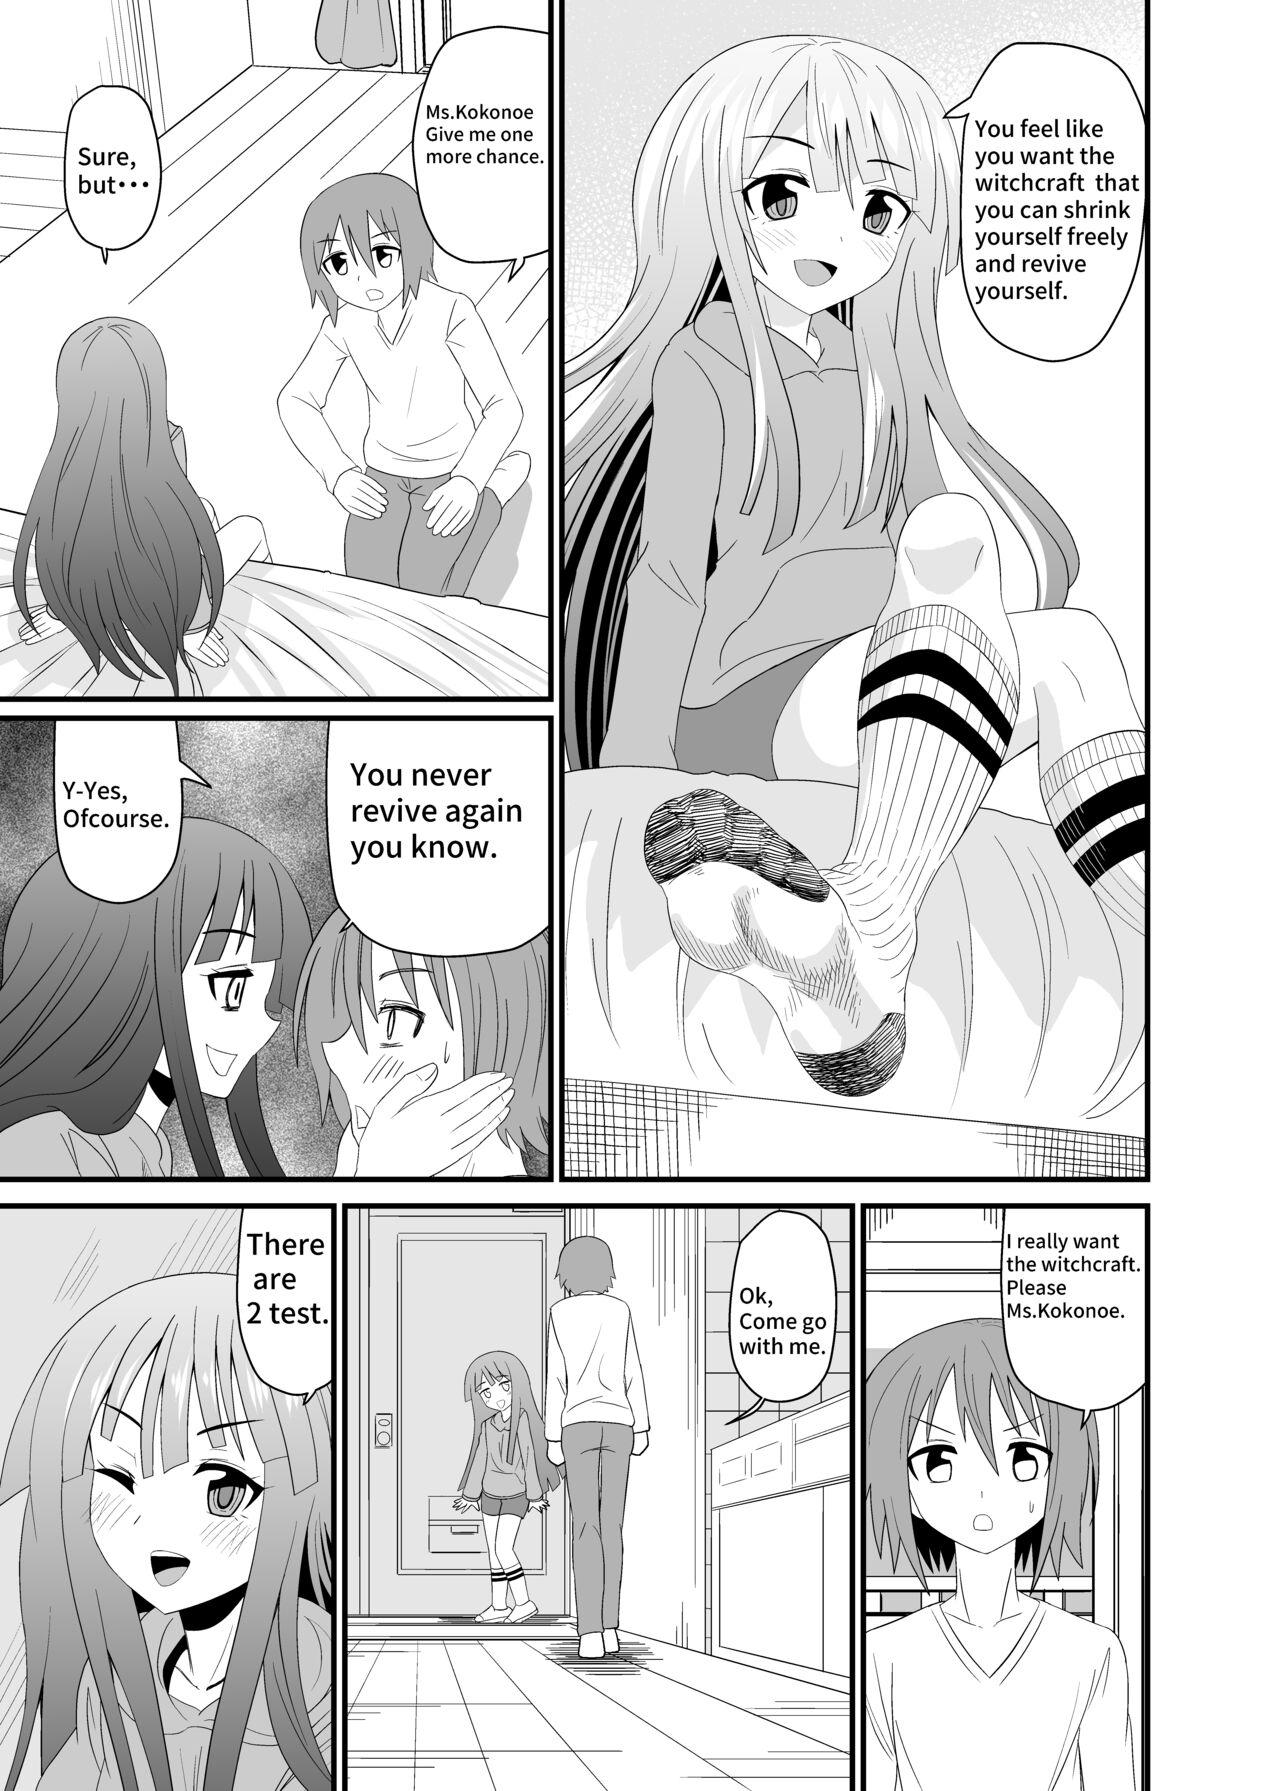 Gay Blondhair In the shoes of a Plain Girl - Original Follada - Page 2